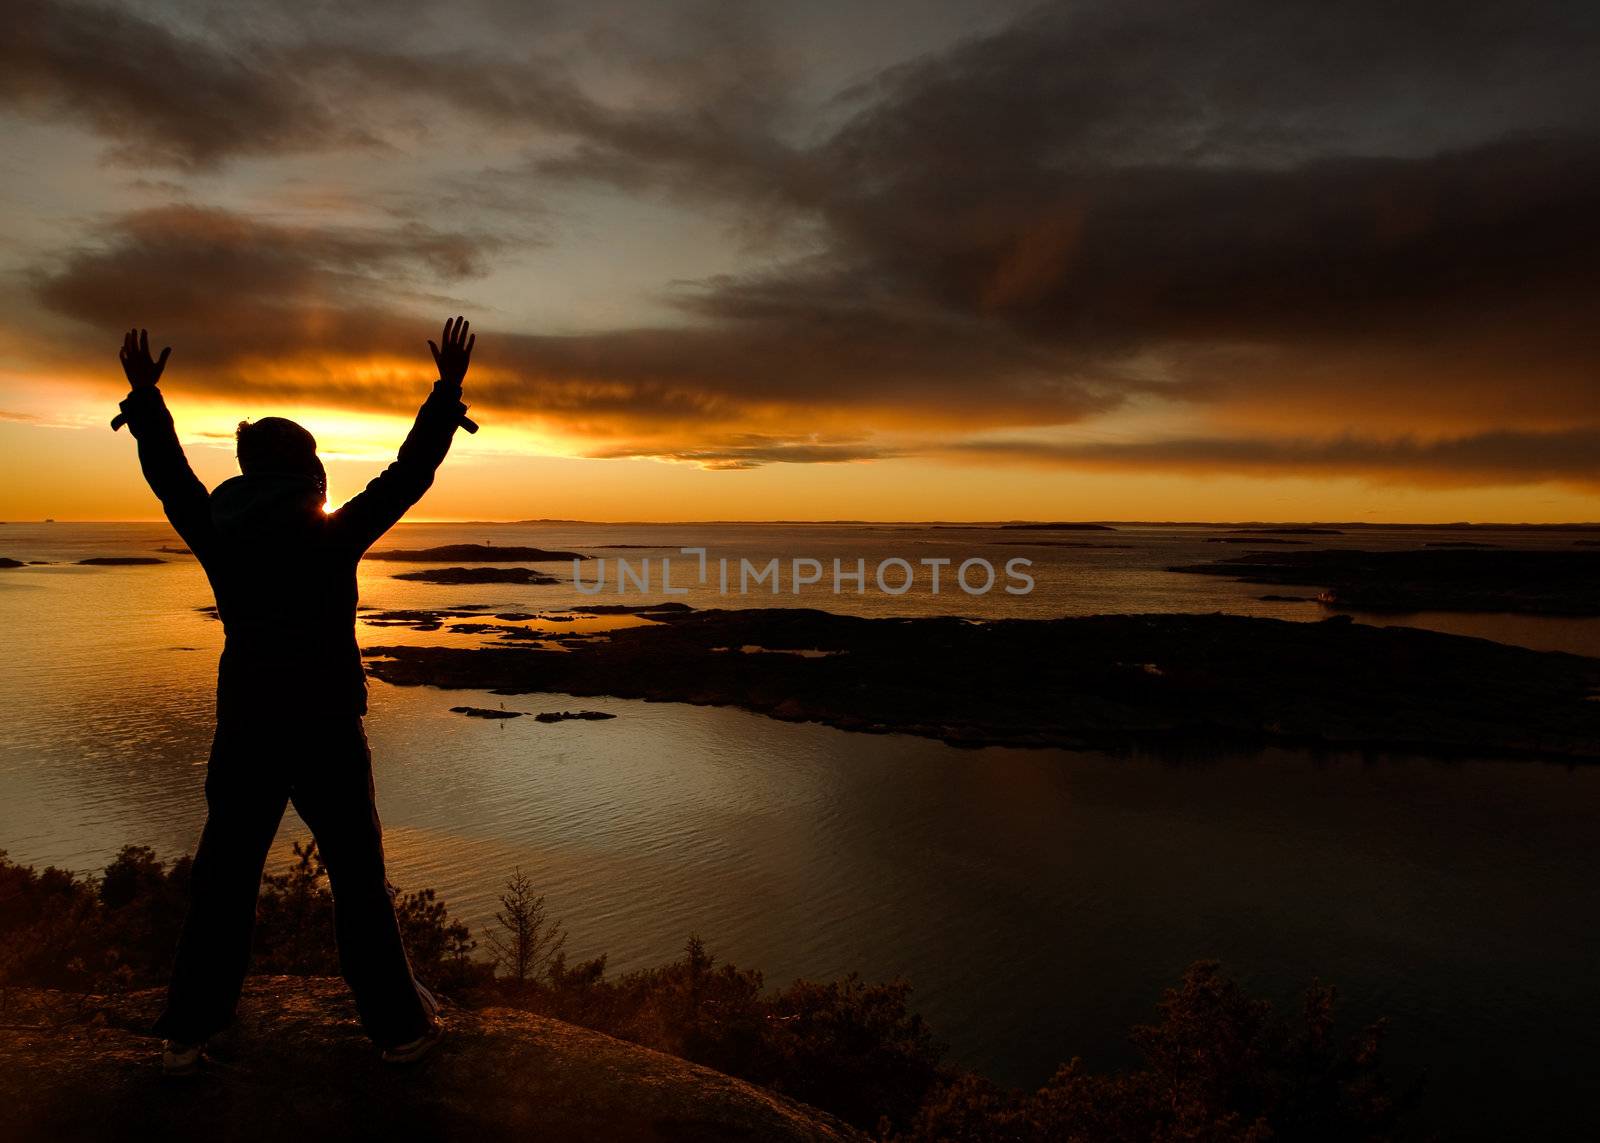 A person standing by the ocean raising their arms in celebration